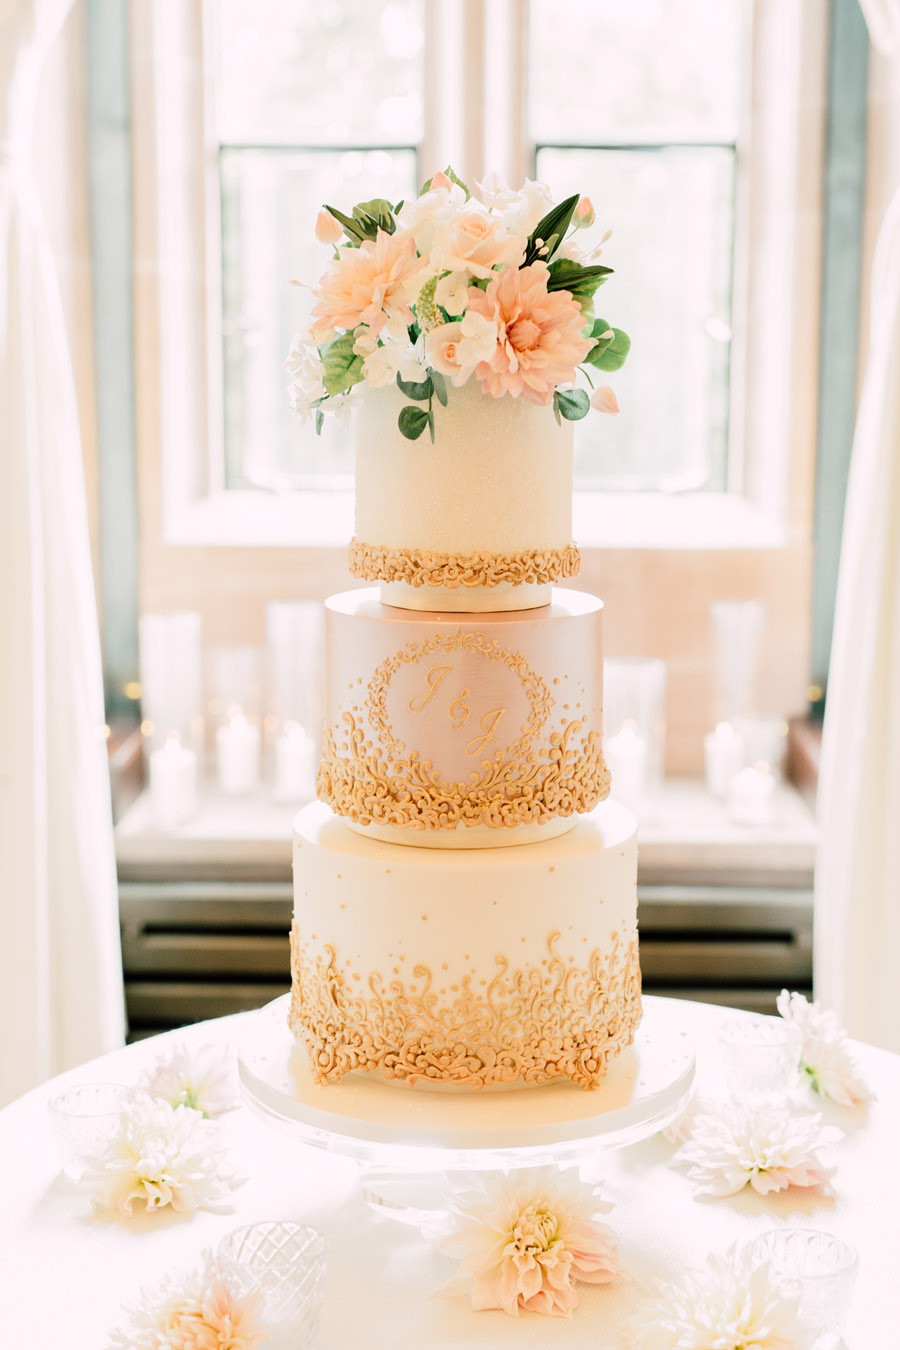 Beautiful wedding cakes by The Frostery - trends and ideas for 2019 (10)